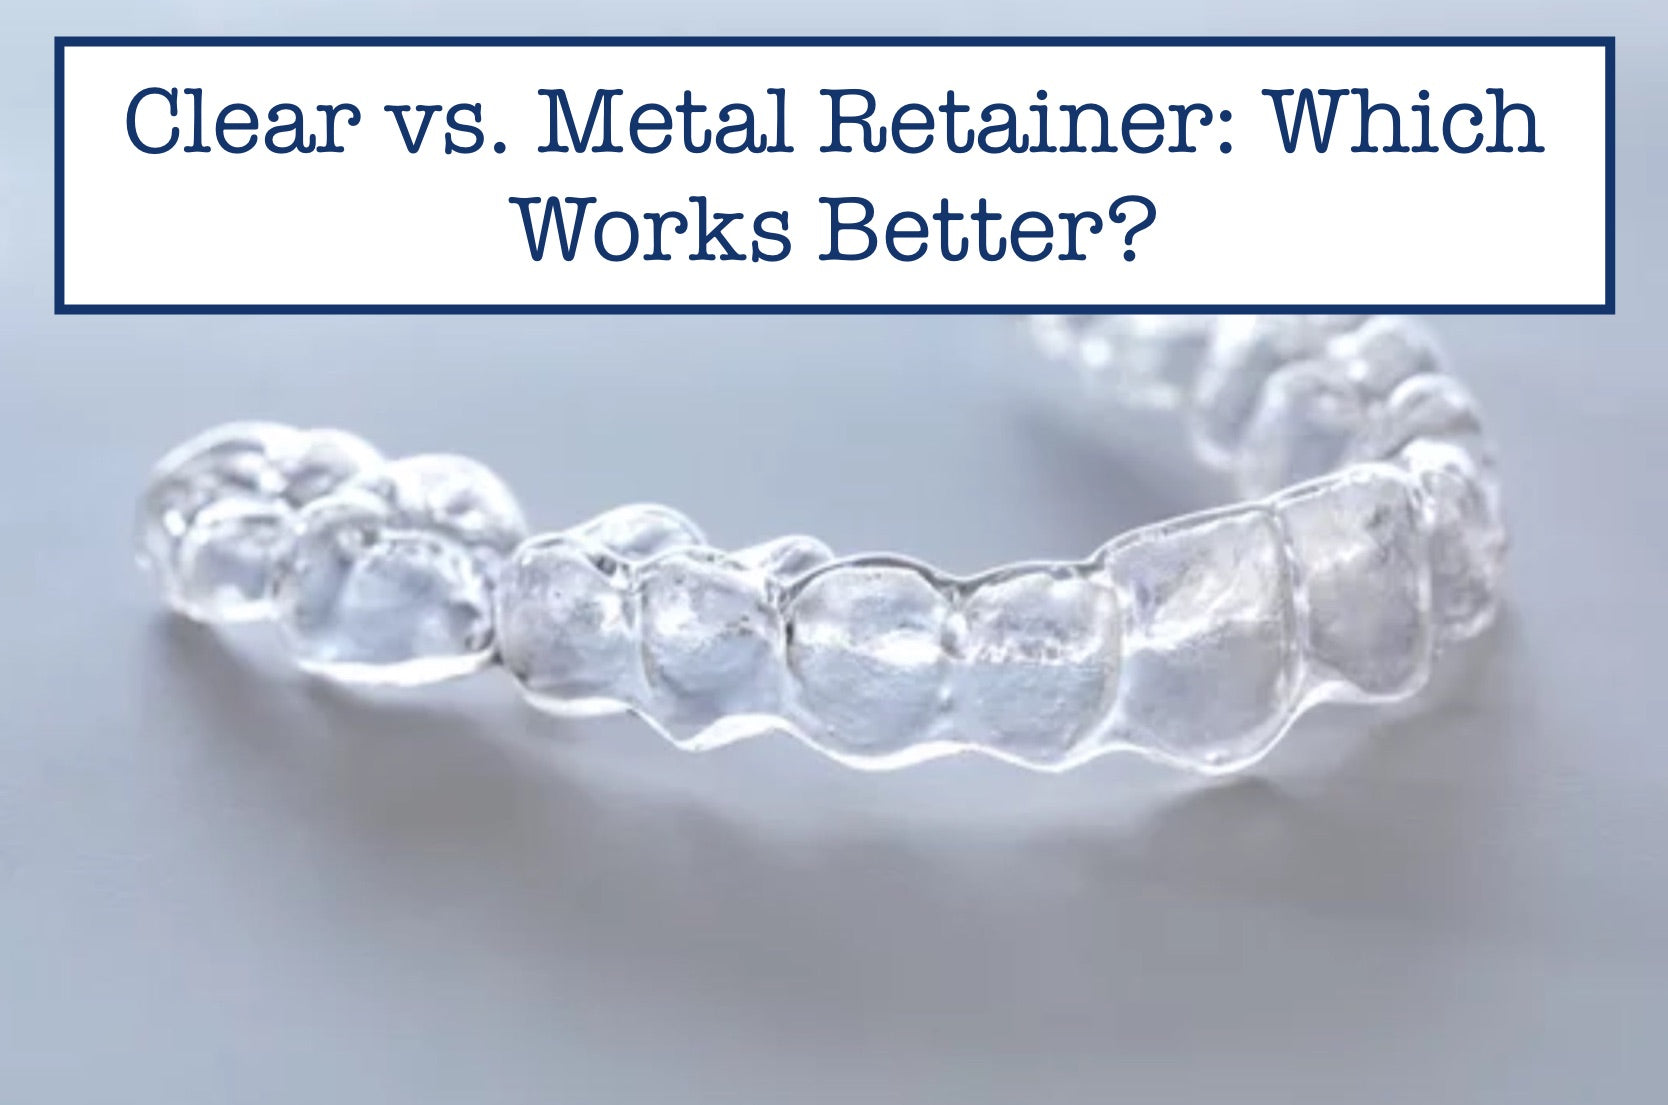 What Is the Most Expensive Type of Retainer?